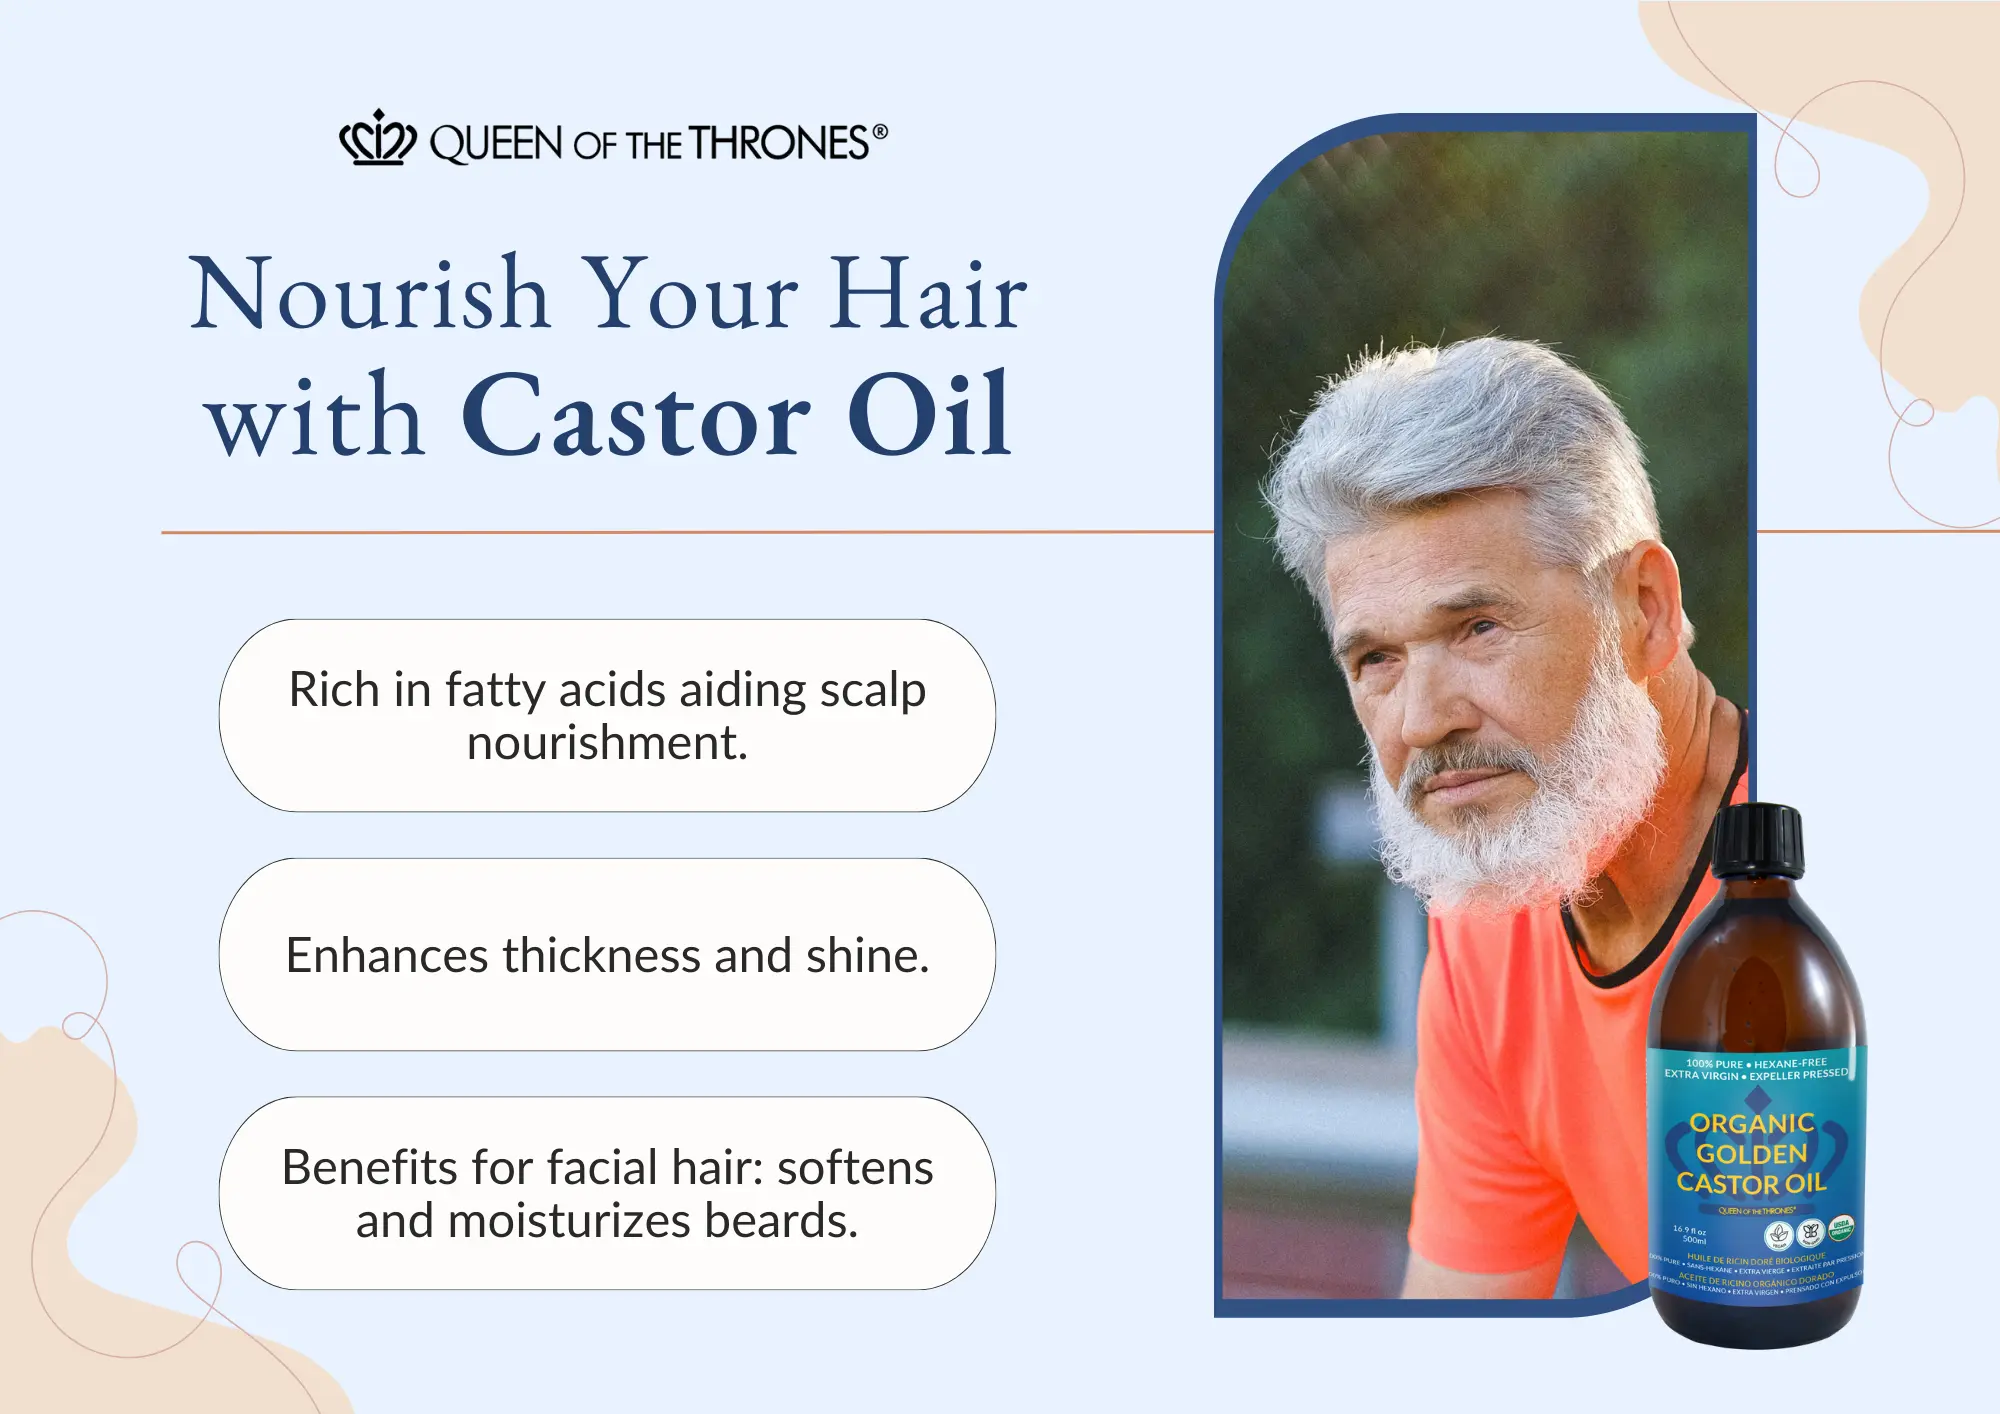 Queen of the Thrones nourish your hair with Castor oil